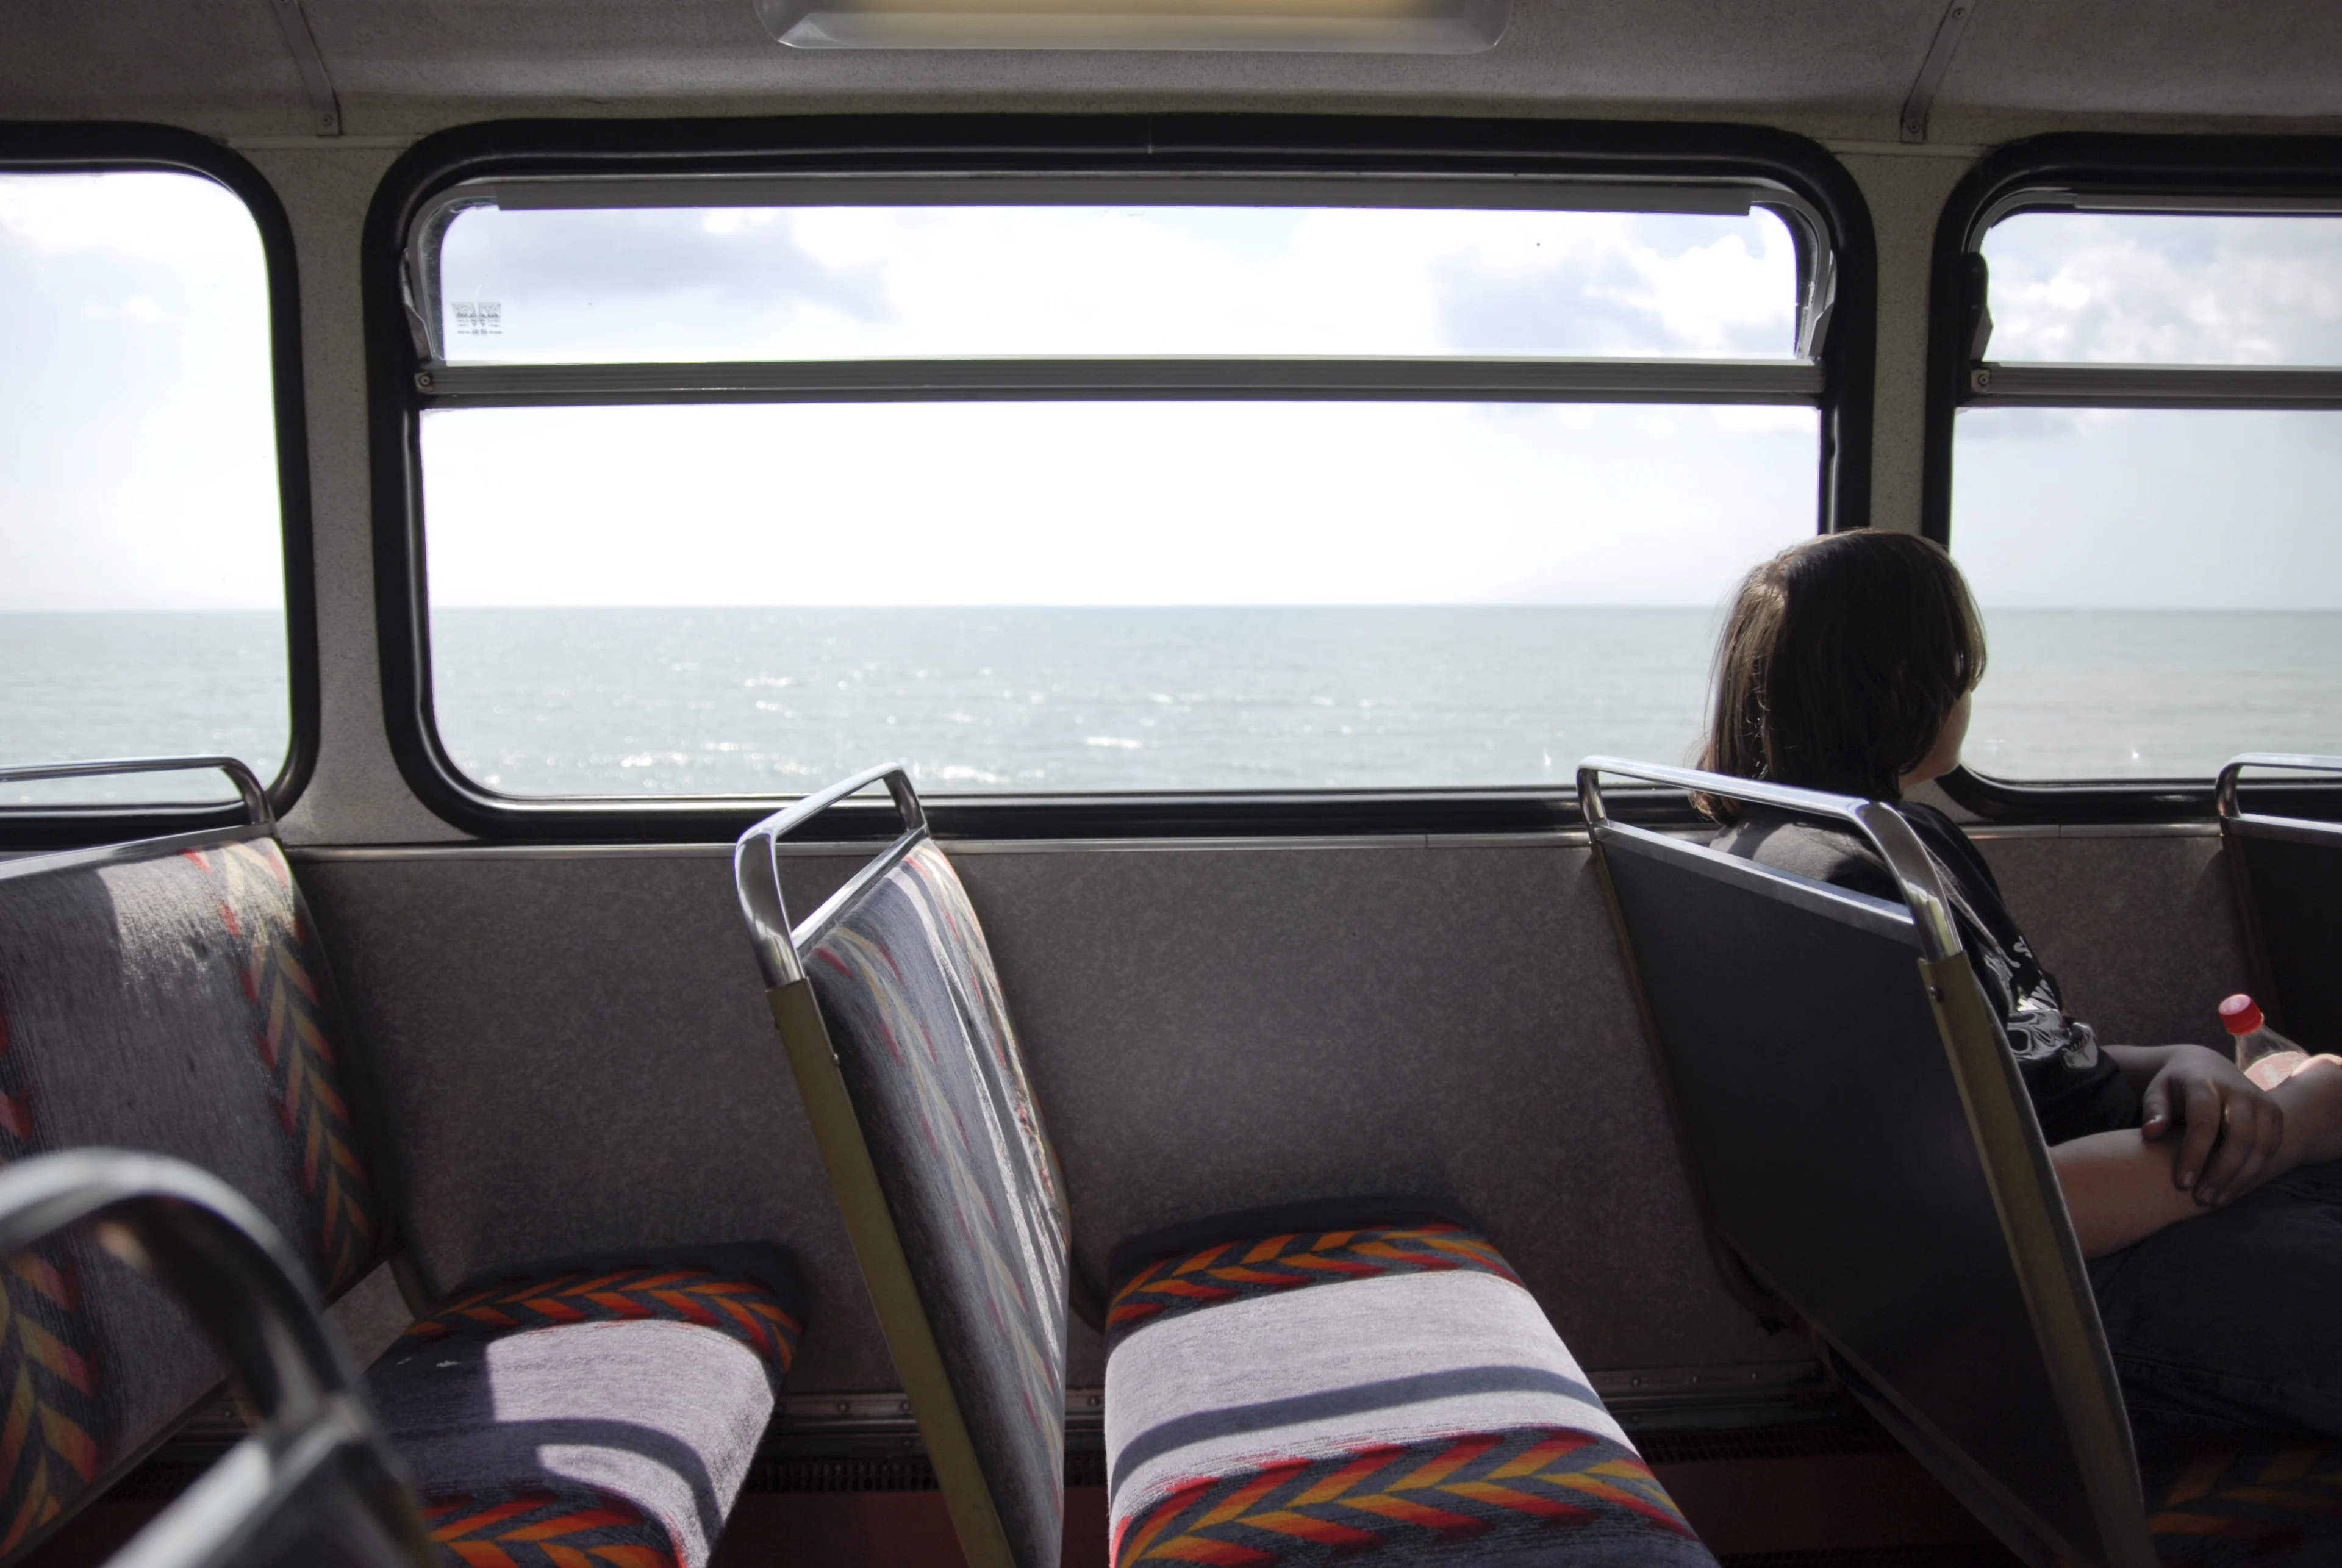 A young person alone on the top deck of a bus looks out the window out to sea on a sunny day